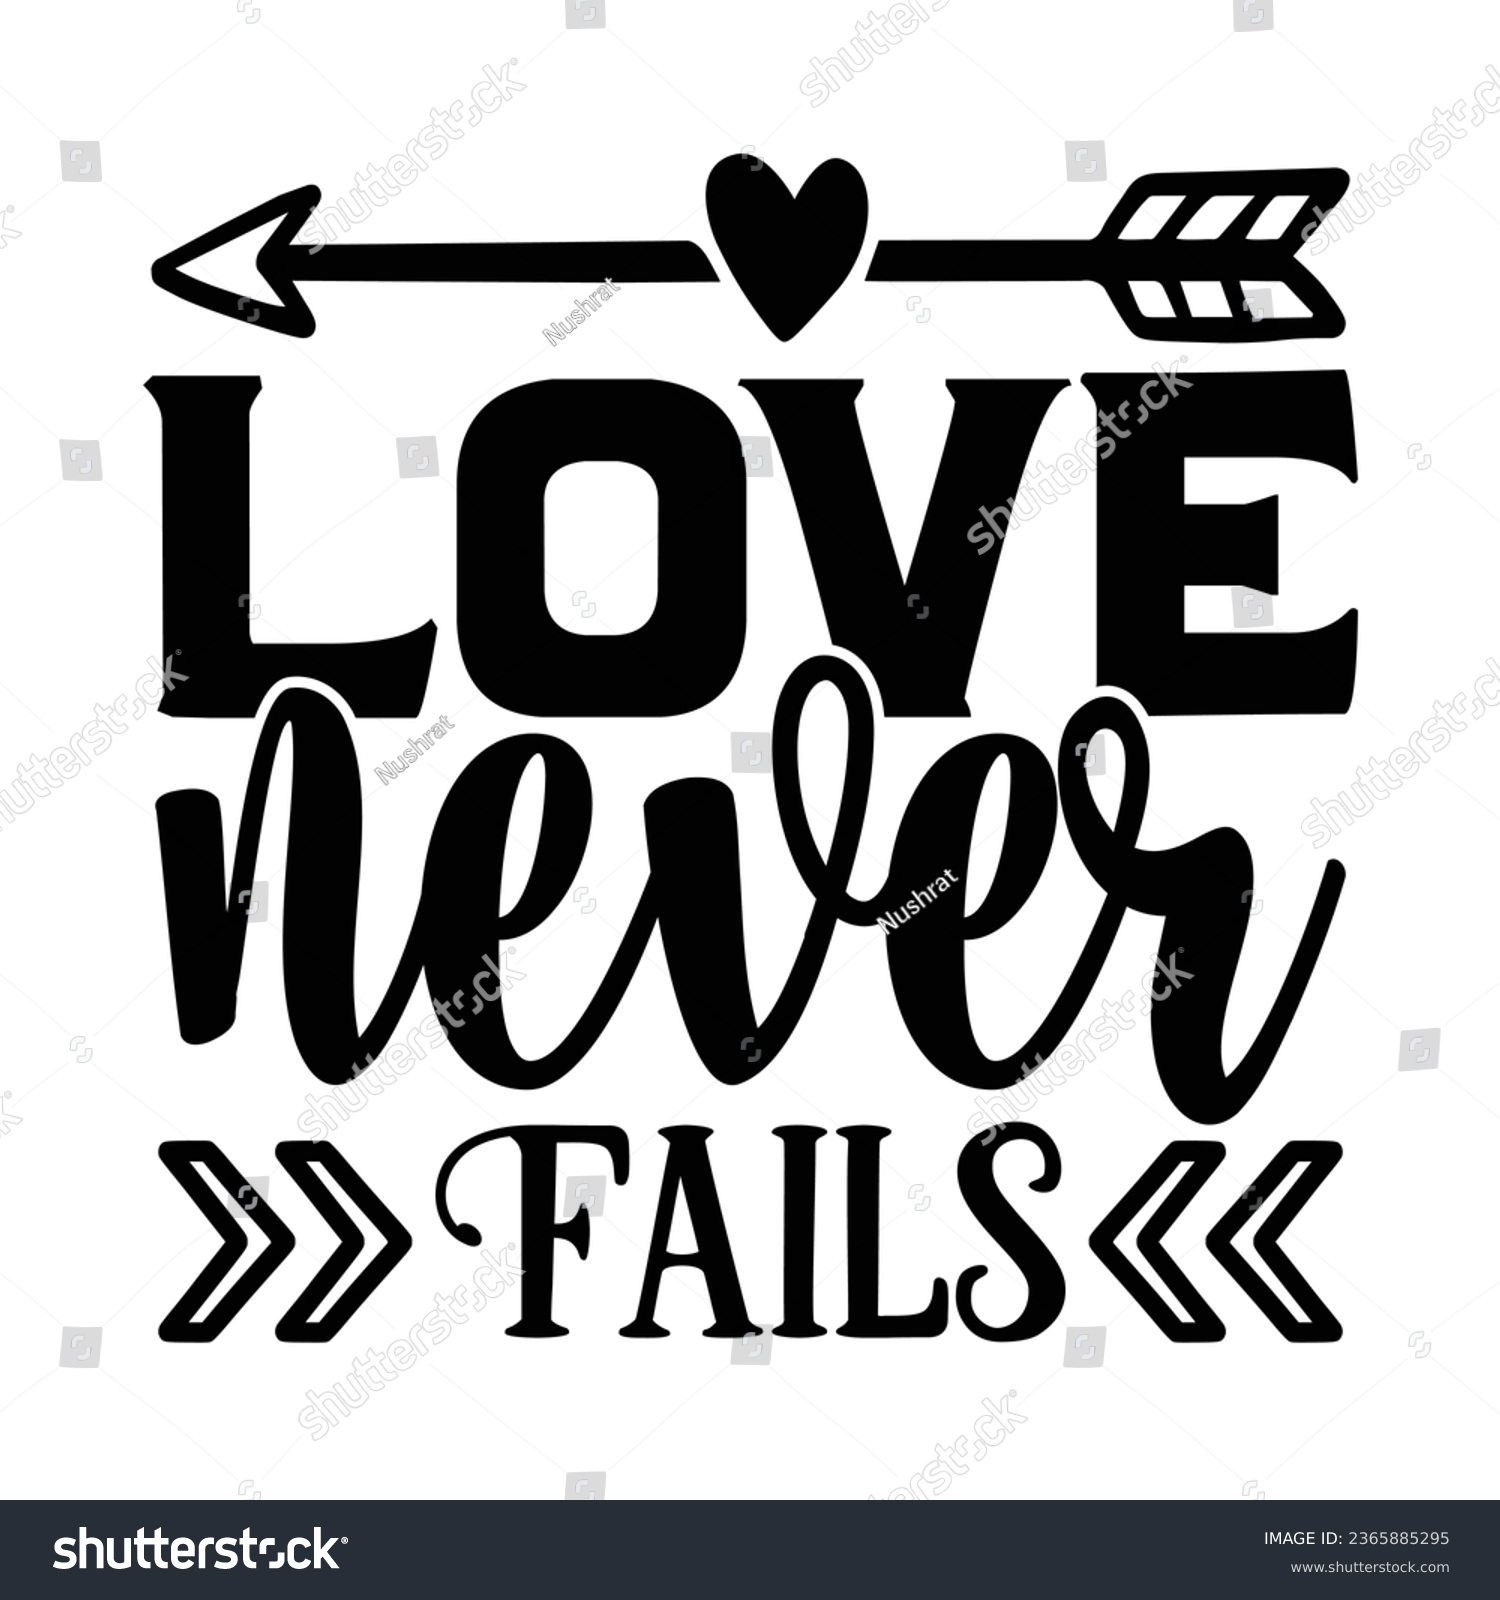 SVG of love never fails, Christian quotes  cut files Design, Christian quotes t shirt designs Template svg